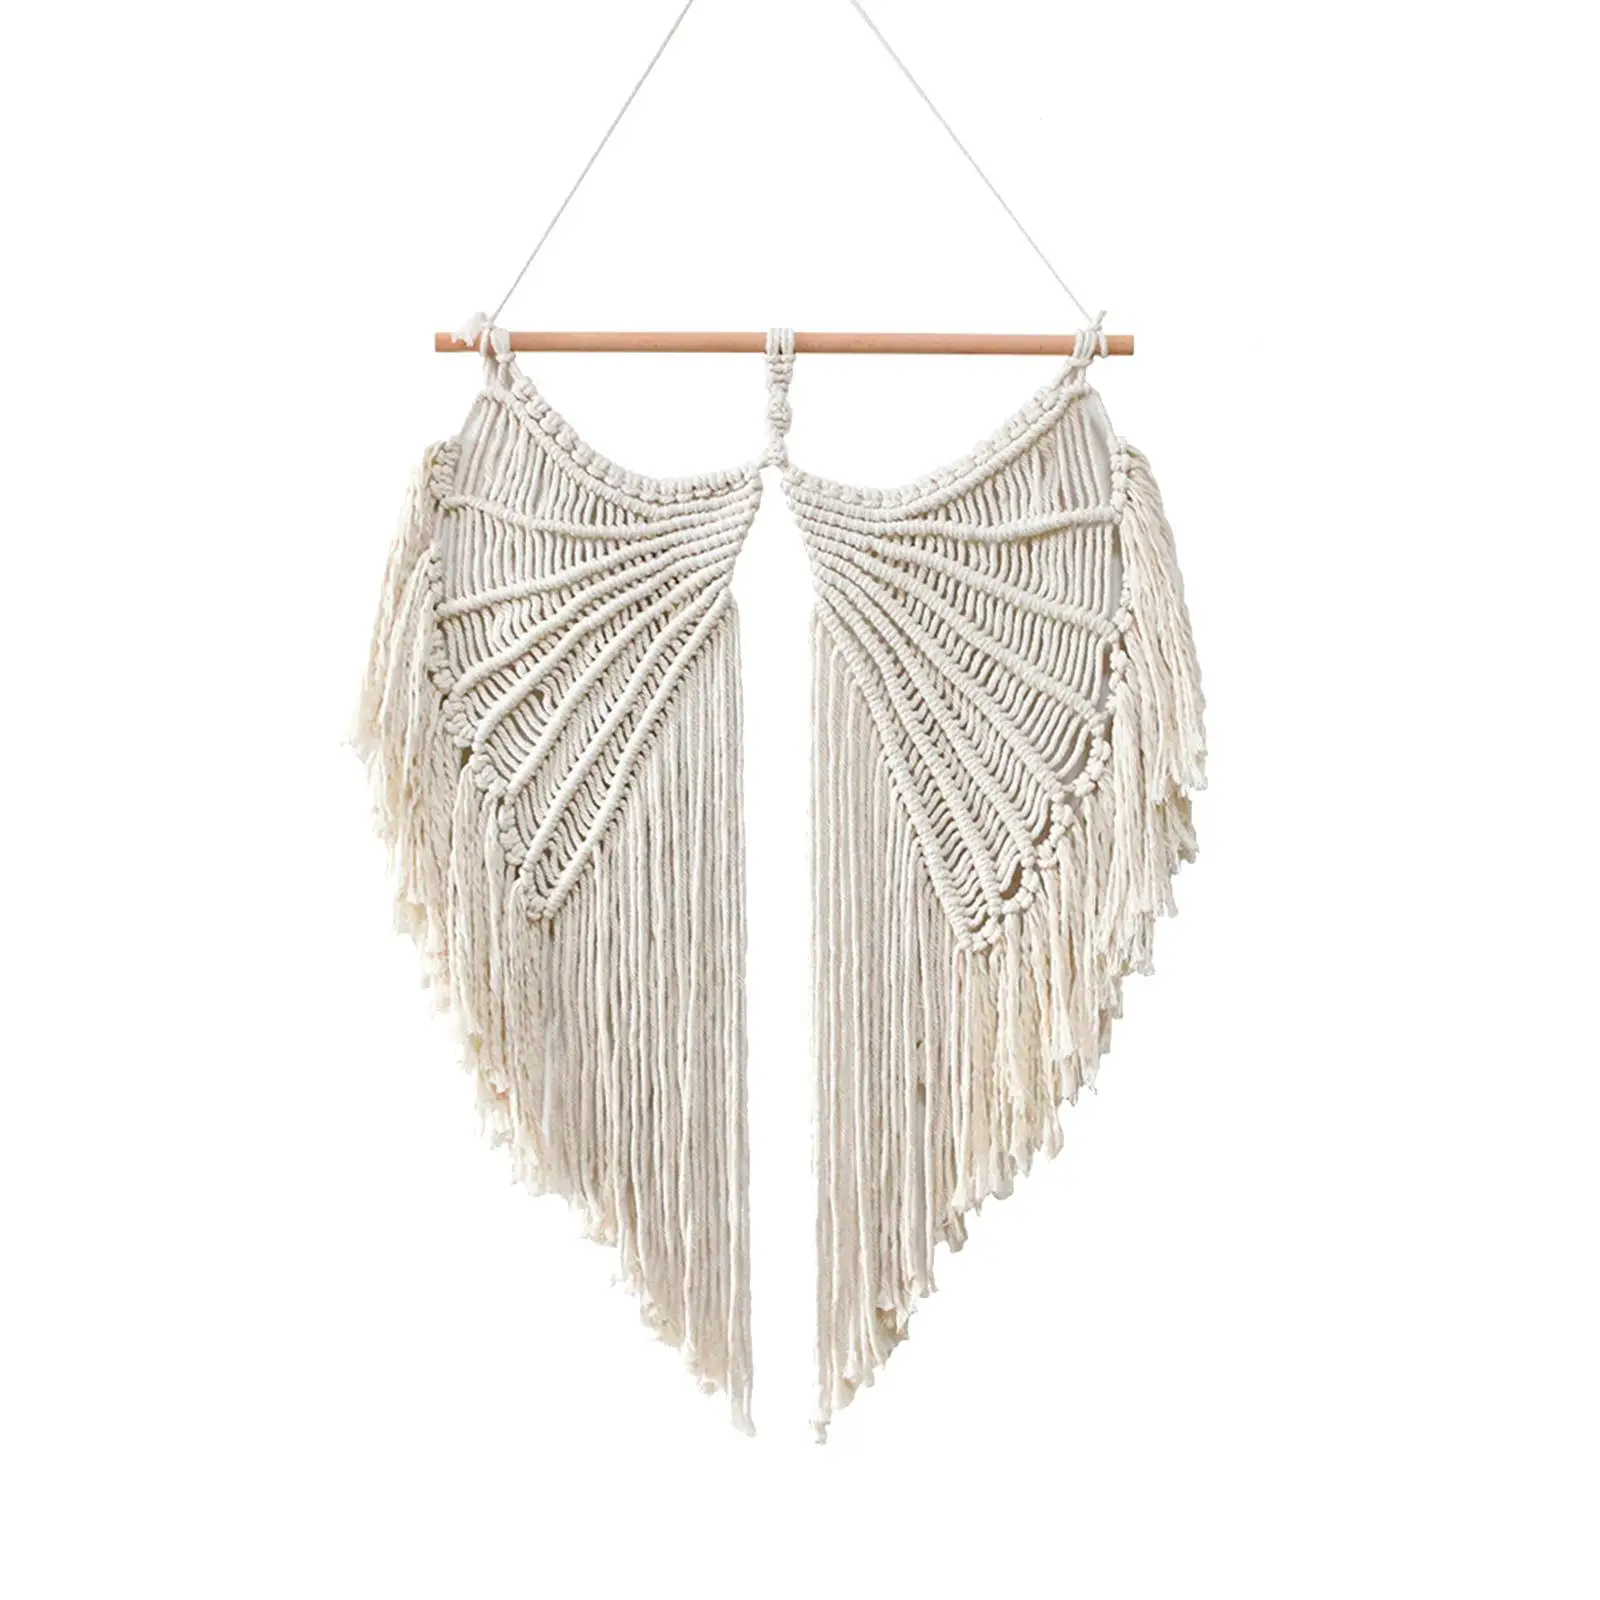 Macrame Wall Hanging Ornaments with Long Tassels Handmade Angel Wing Tapestry for Wedding Dorm Living Room Apartment Party